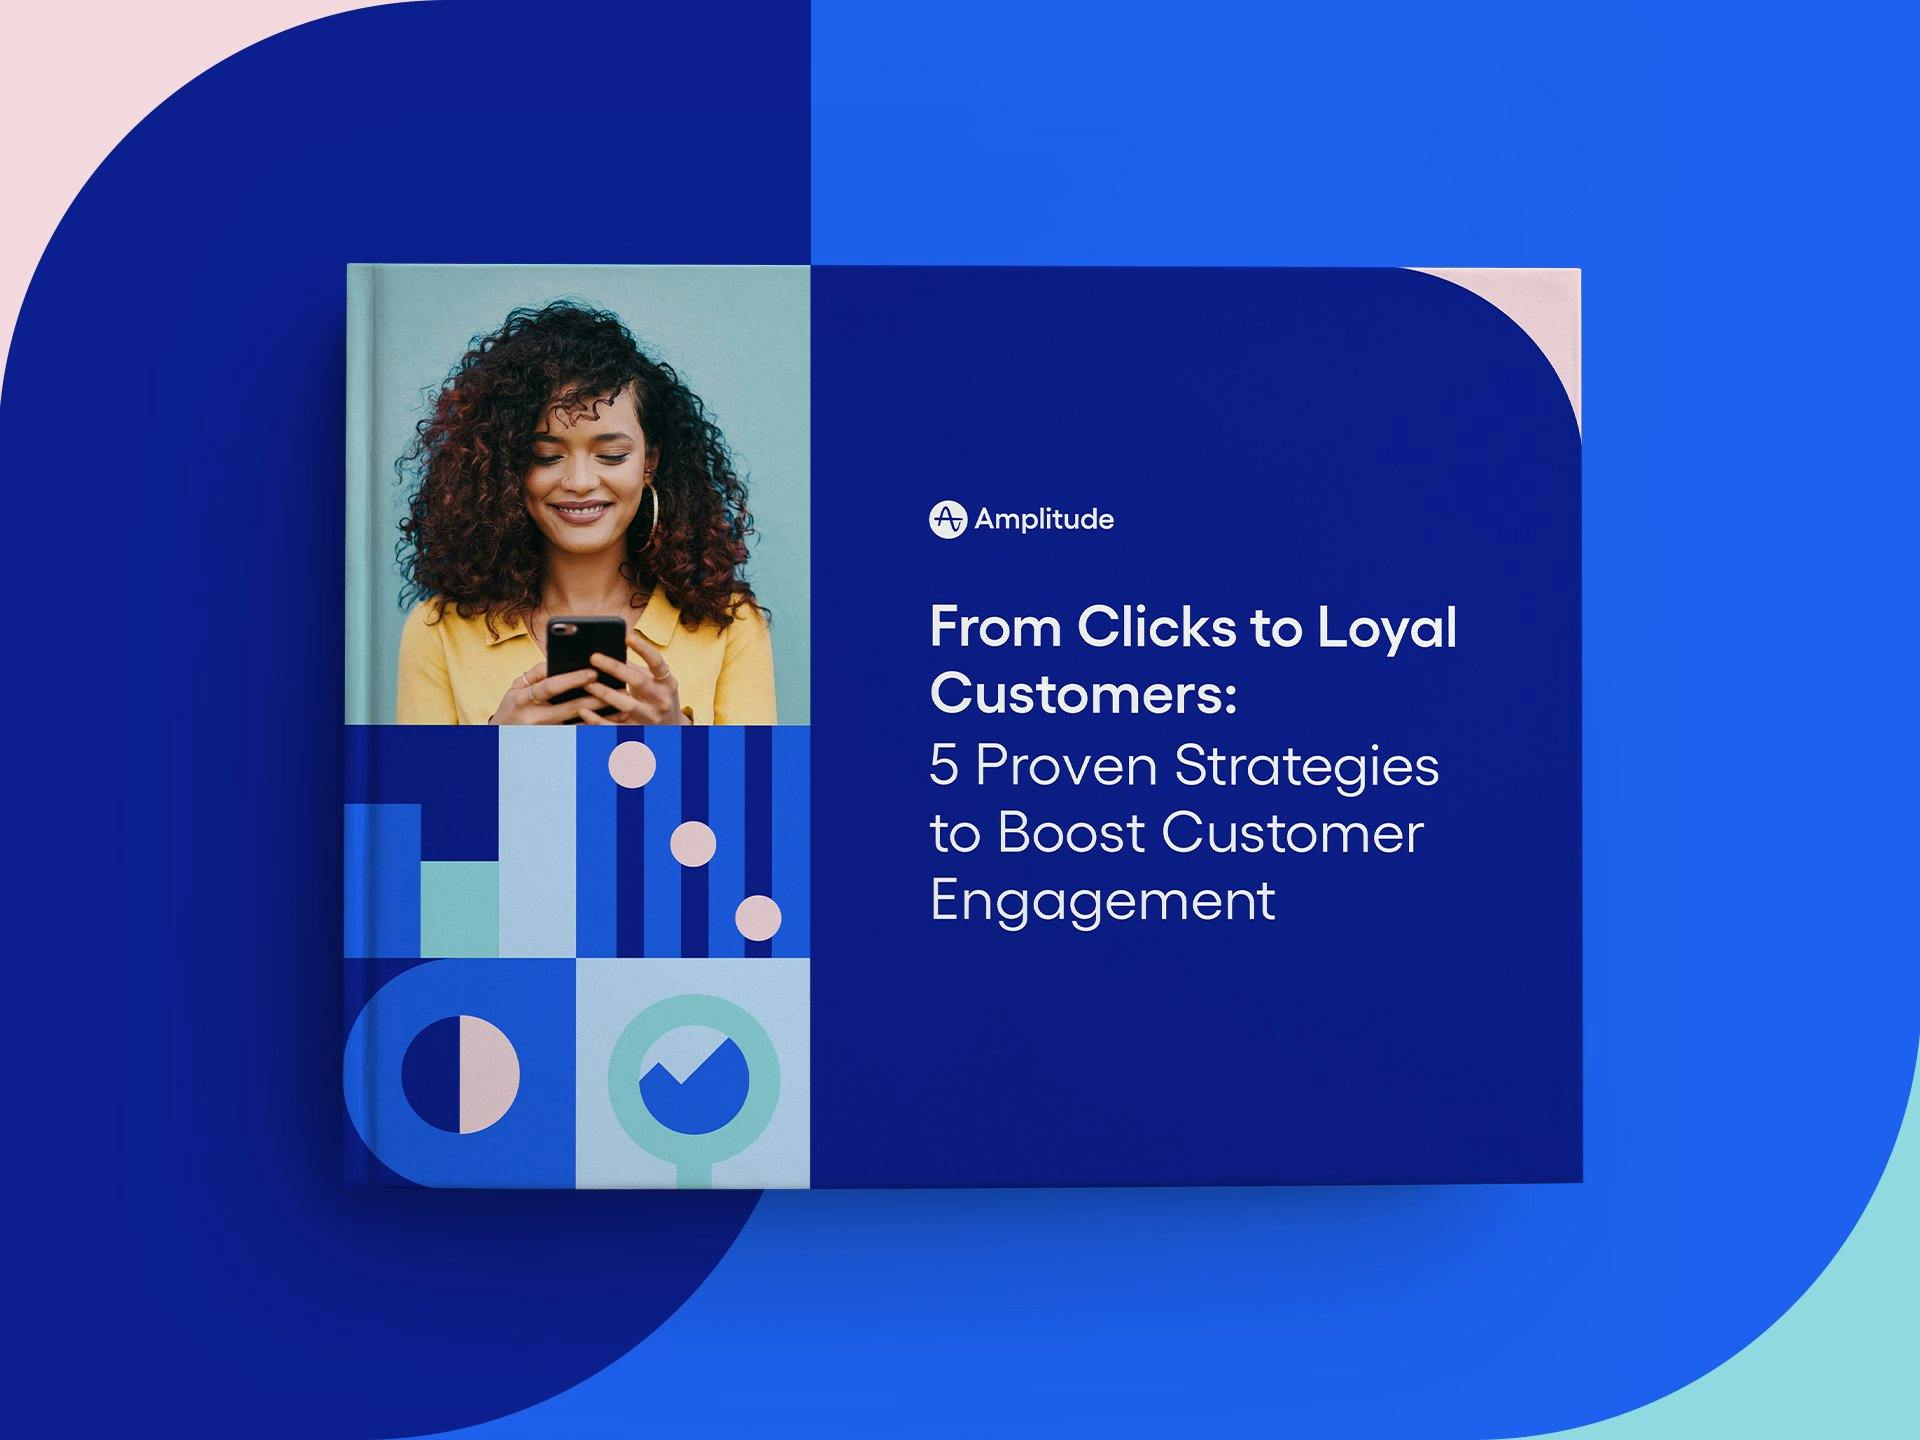 Implement these best practices to increase engagement—and retention and revenue.